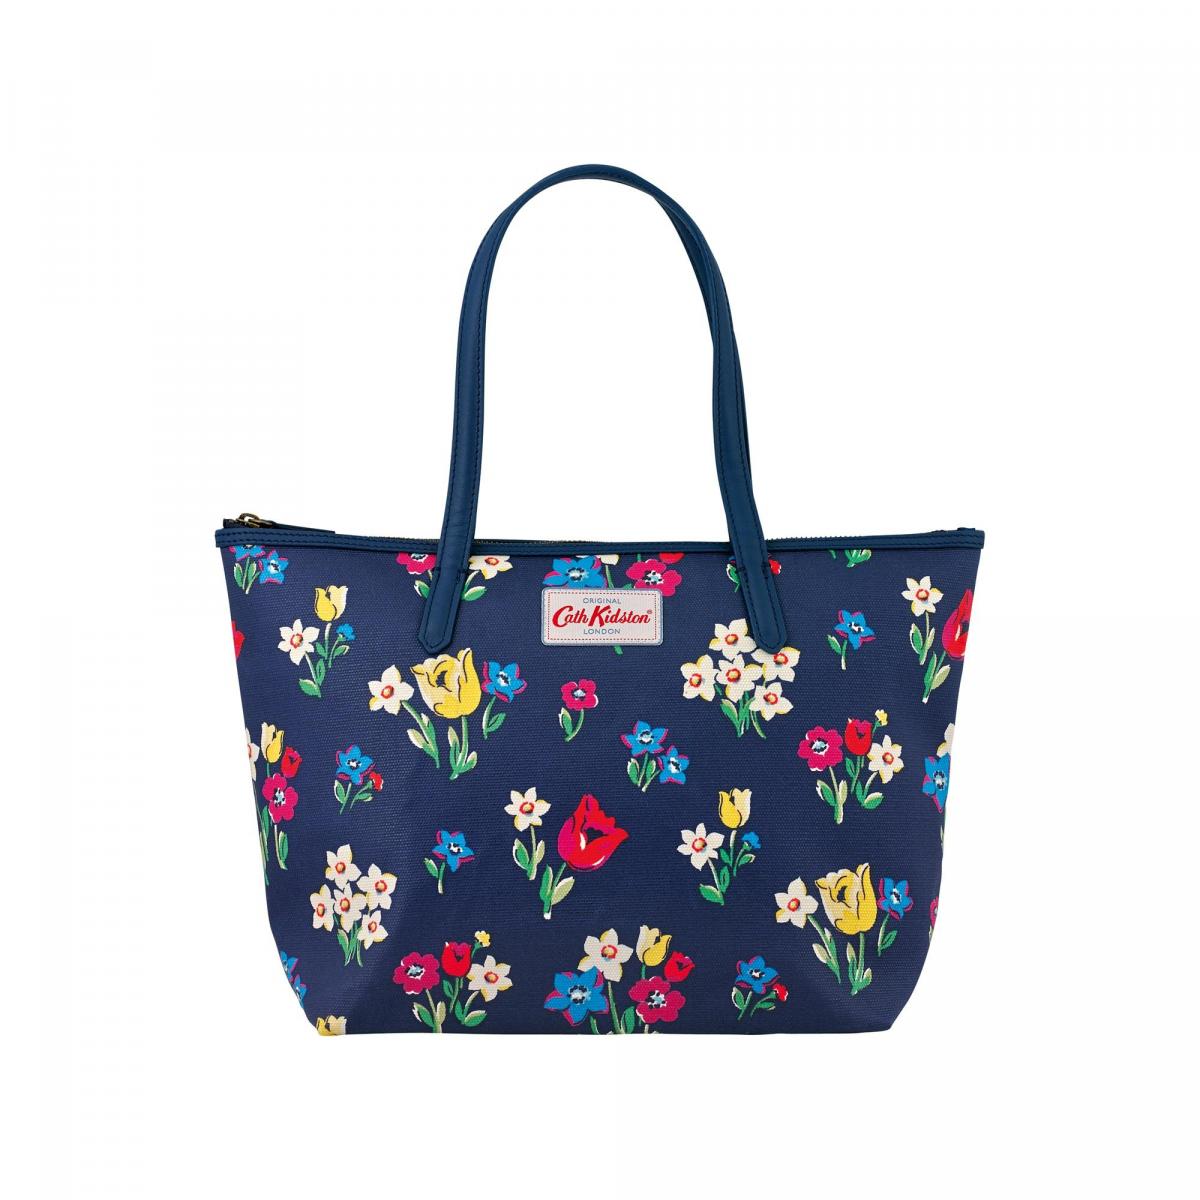 Cath Kidston in John Lewis, paradise bunch small leather trim tote, £60